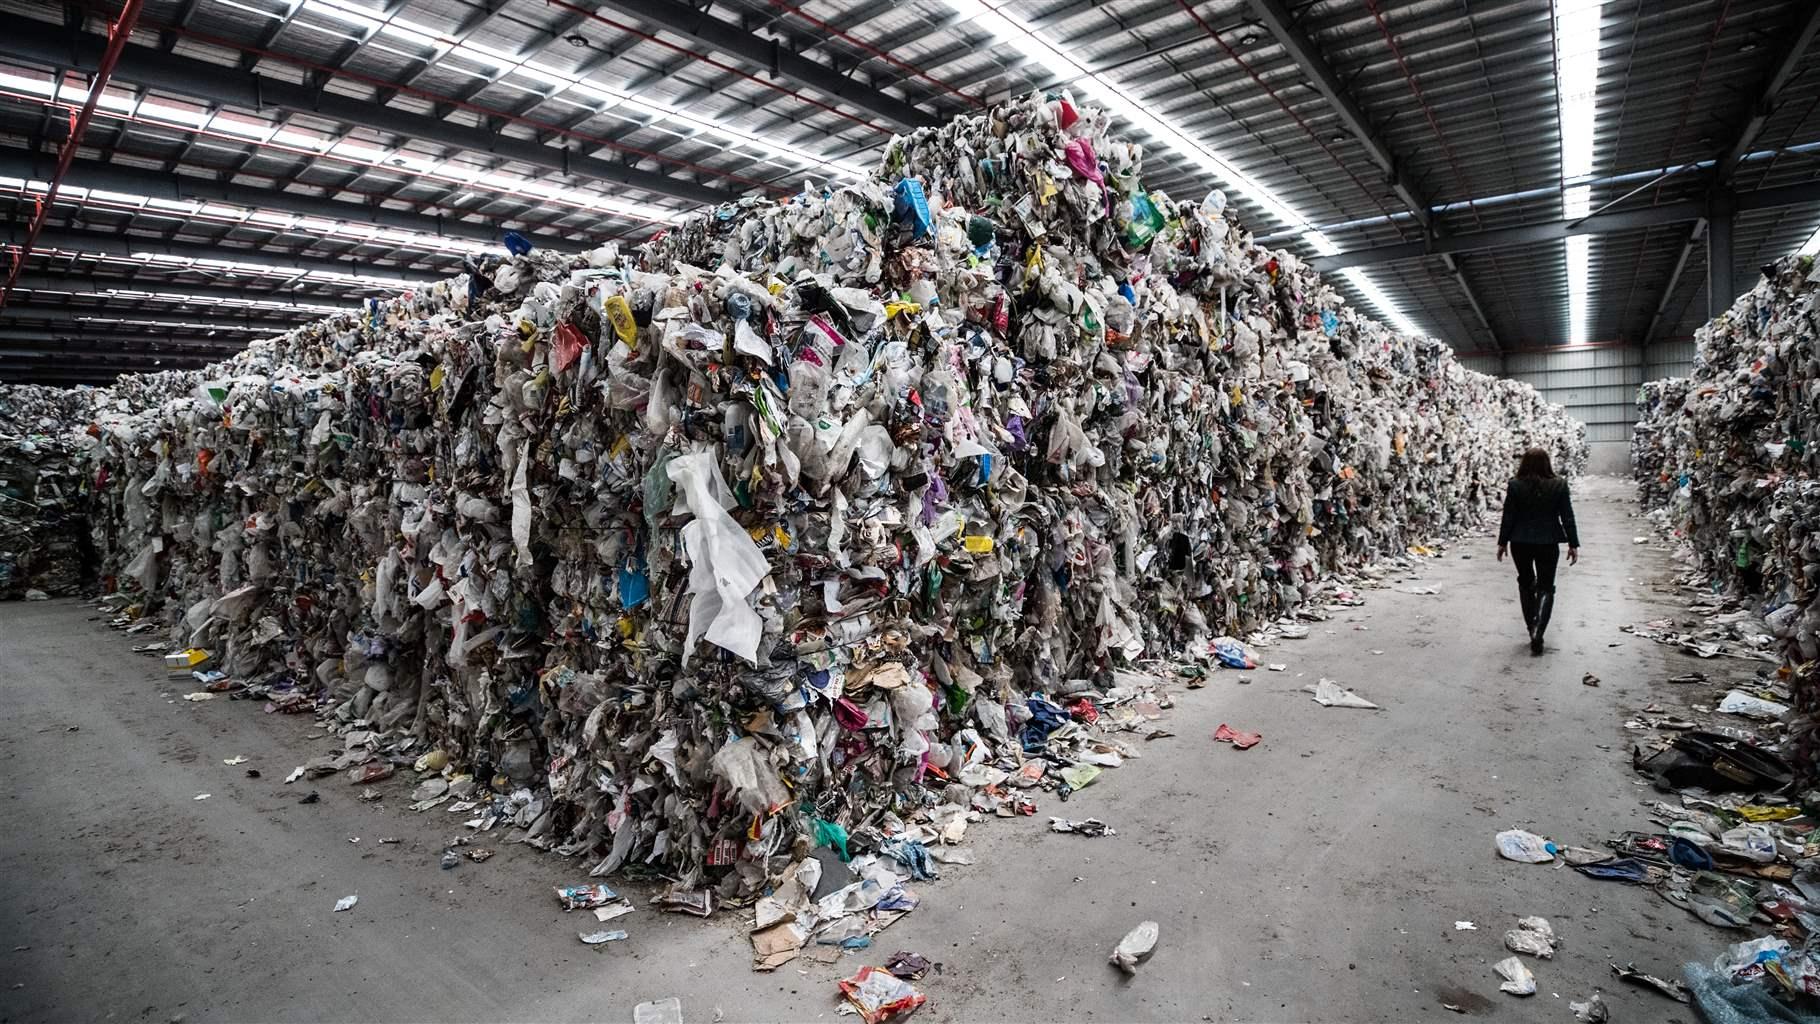 A recycling company in Melbourne, has been declared bankrupt and its six major warehouses are full of recyclable materials awaiting processing. This warehouse is located in the industrial suburb of Derrimut. 